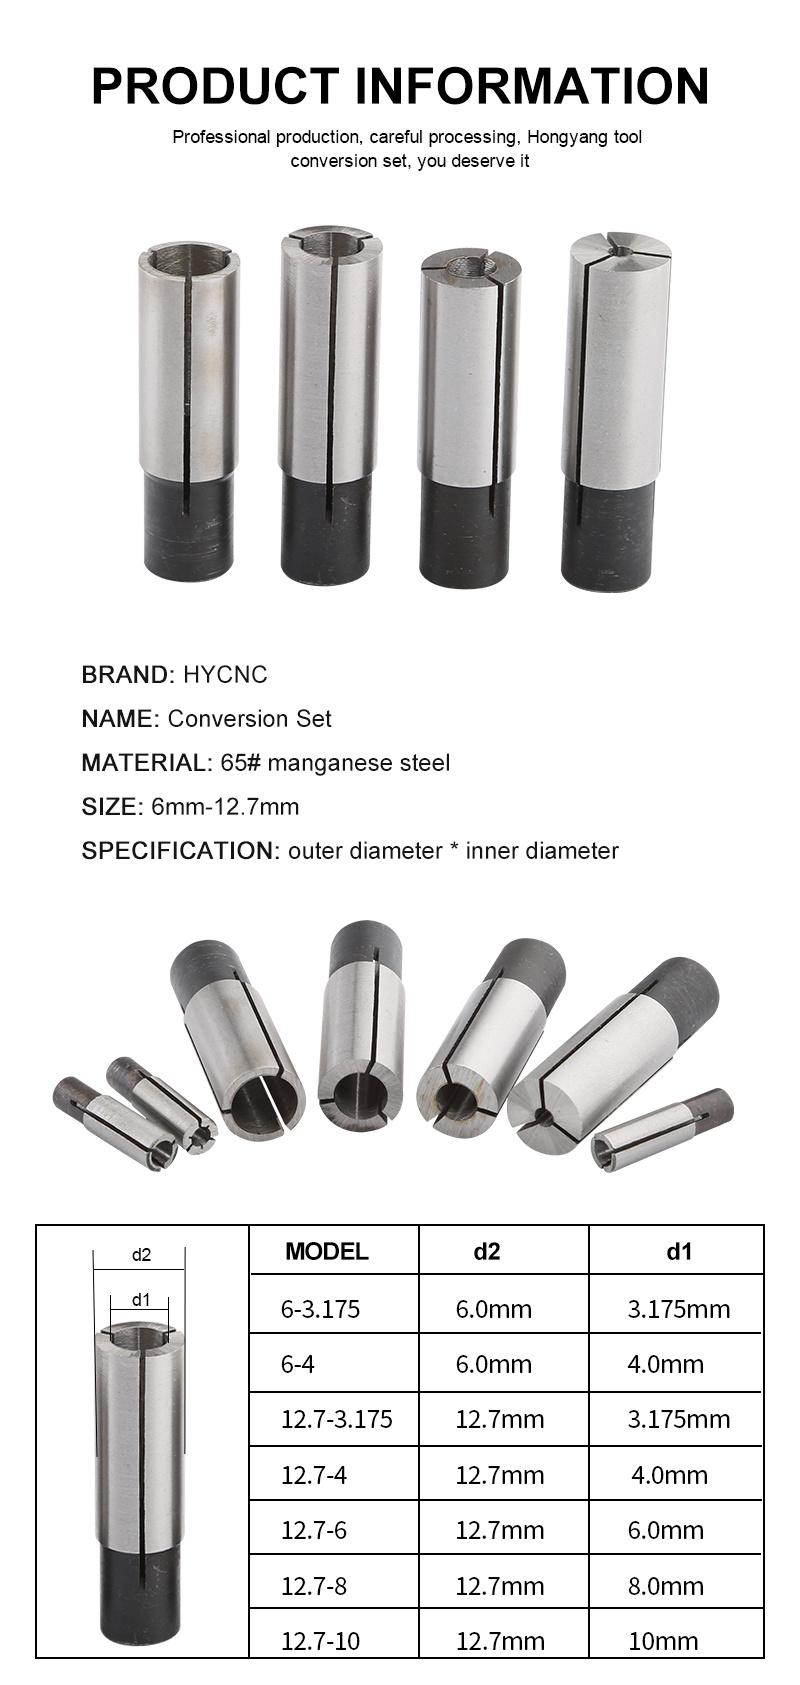 Jinan Hong Yang CNC Machinery Co., Ltd Mainly Selling All Kinds of CNC Router Parts, Including Spindle, Inverter, Motor, Drive, Dust Collector, etc. We Have in